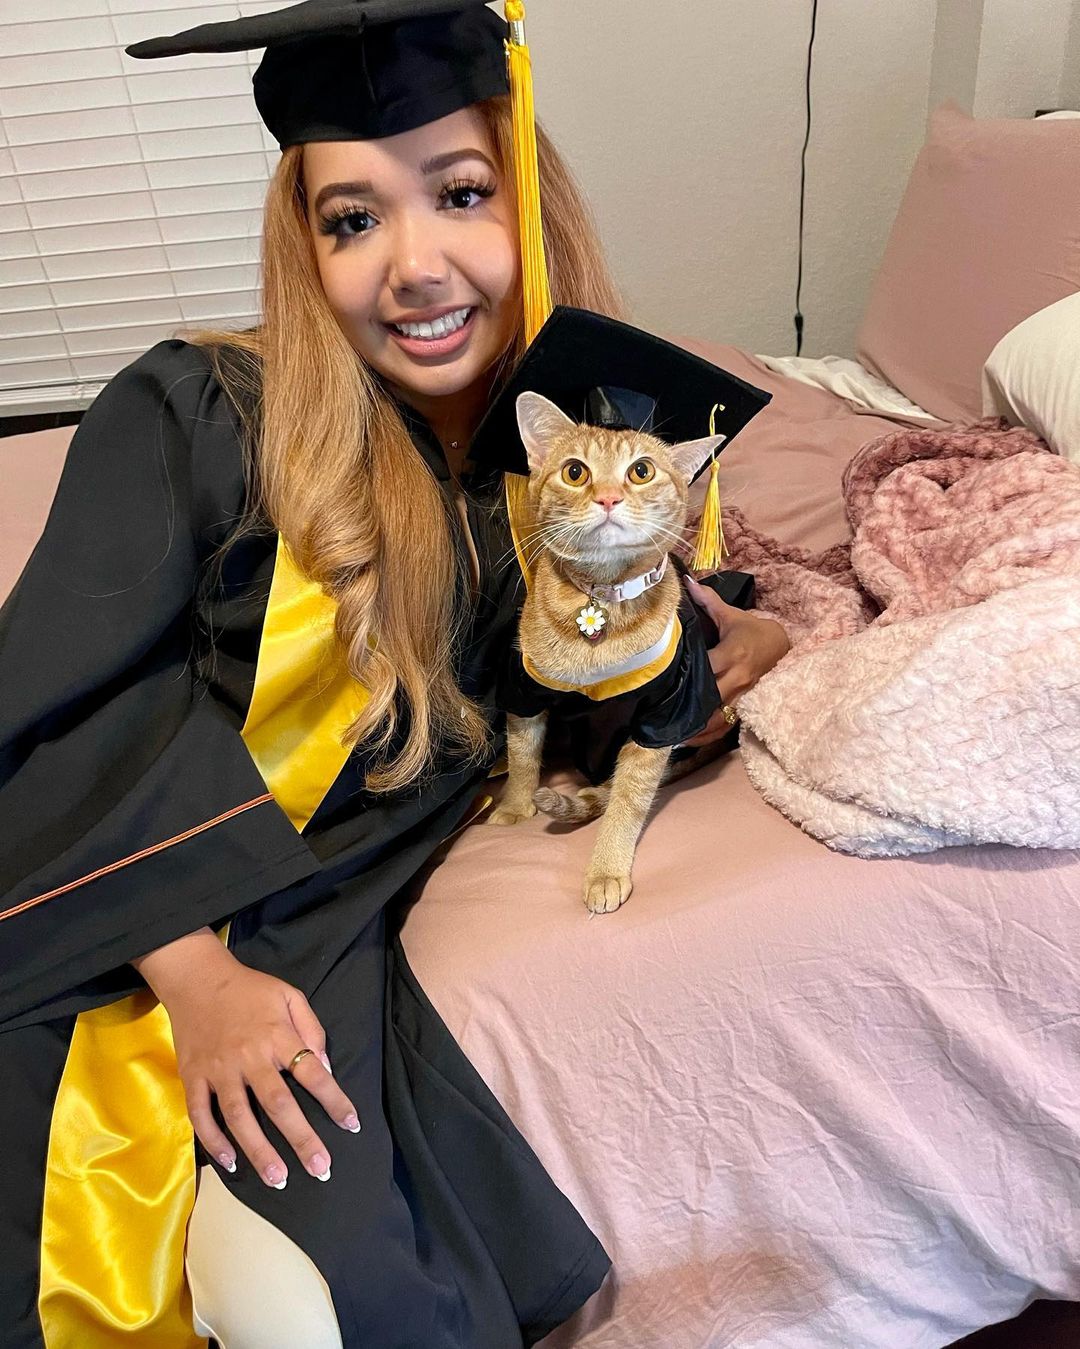 woman graduates from university along with her cat